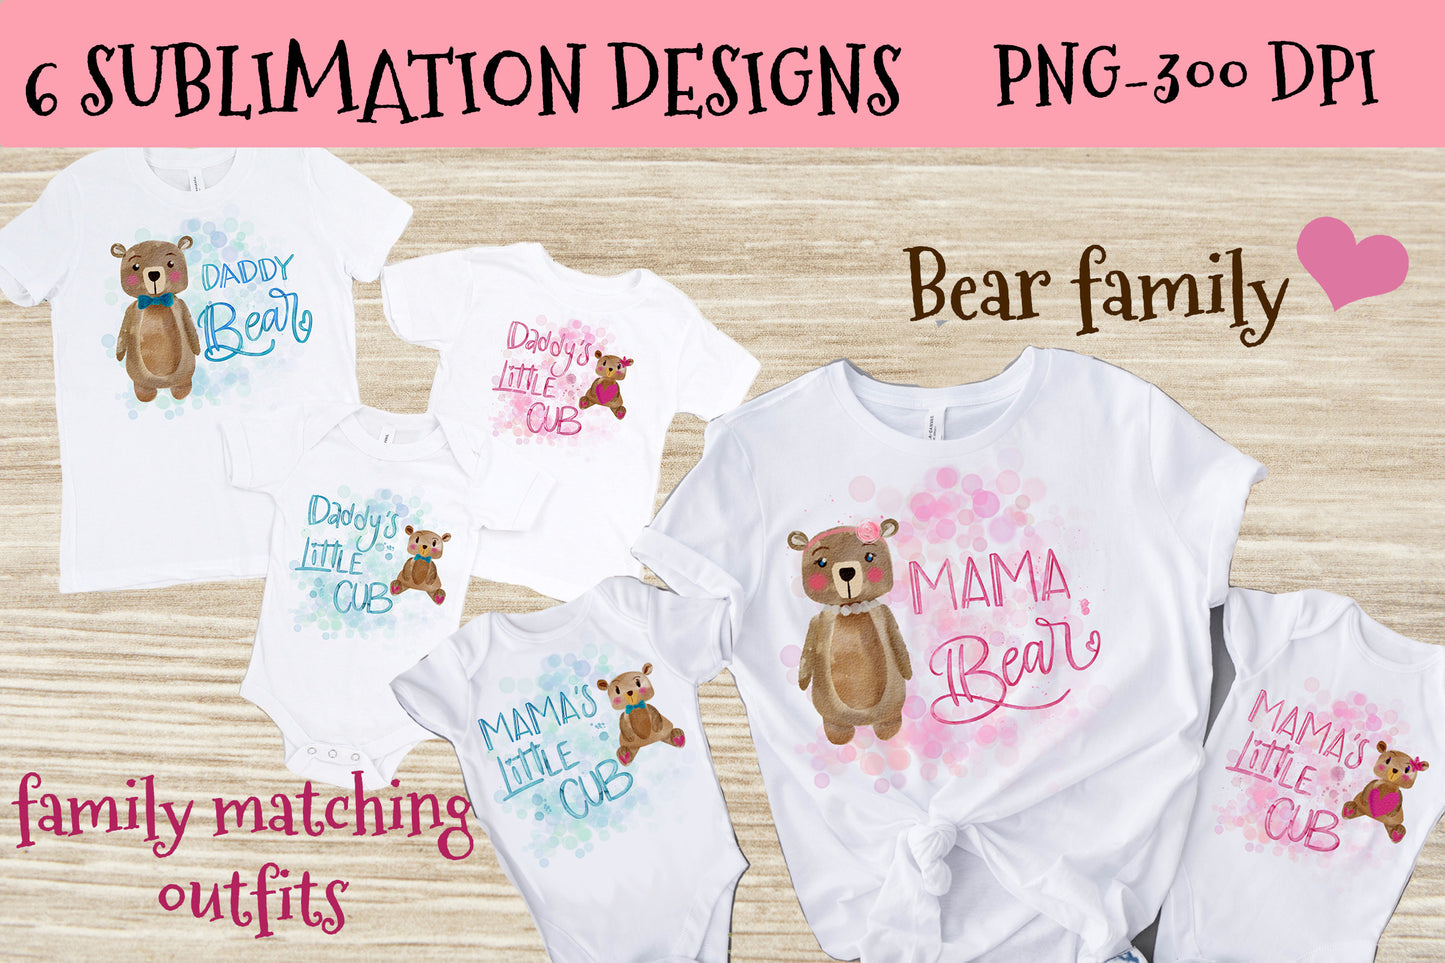 Cute Mama Bear sublimation design for T-shirts